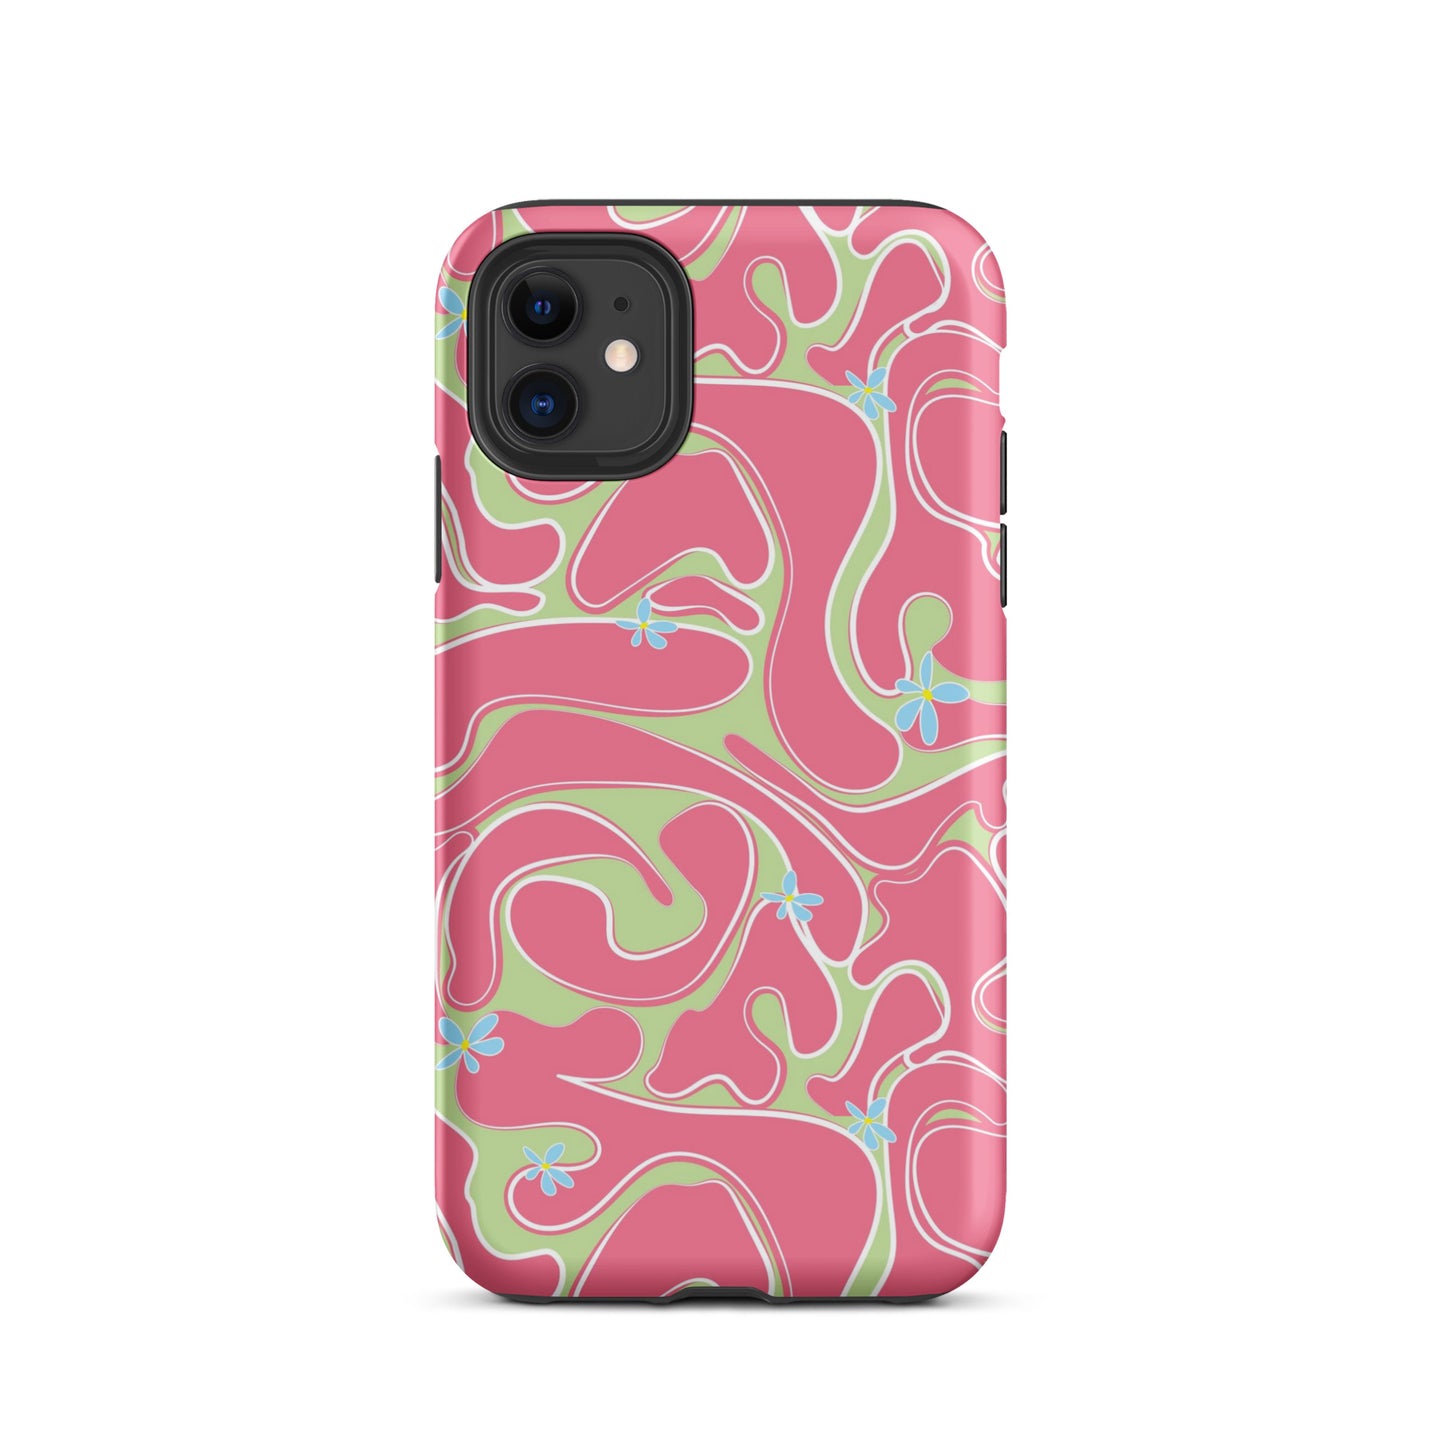 Reef Waves iPhone Case Matte iPhone 11